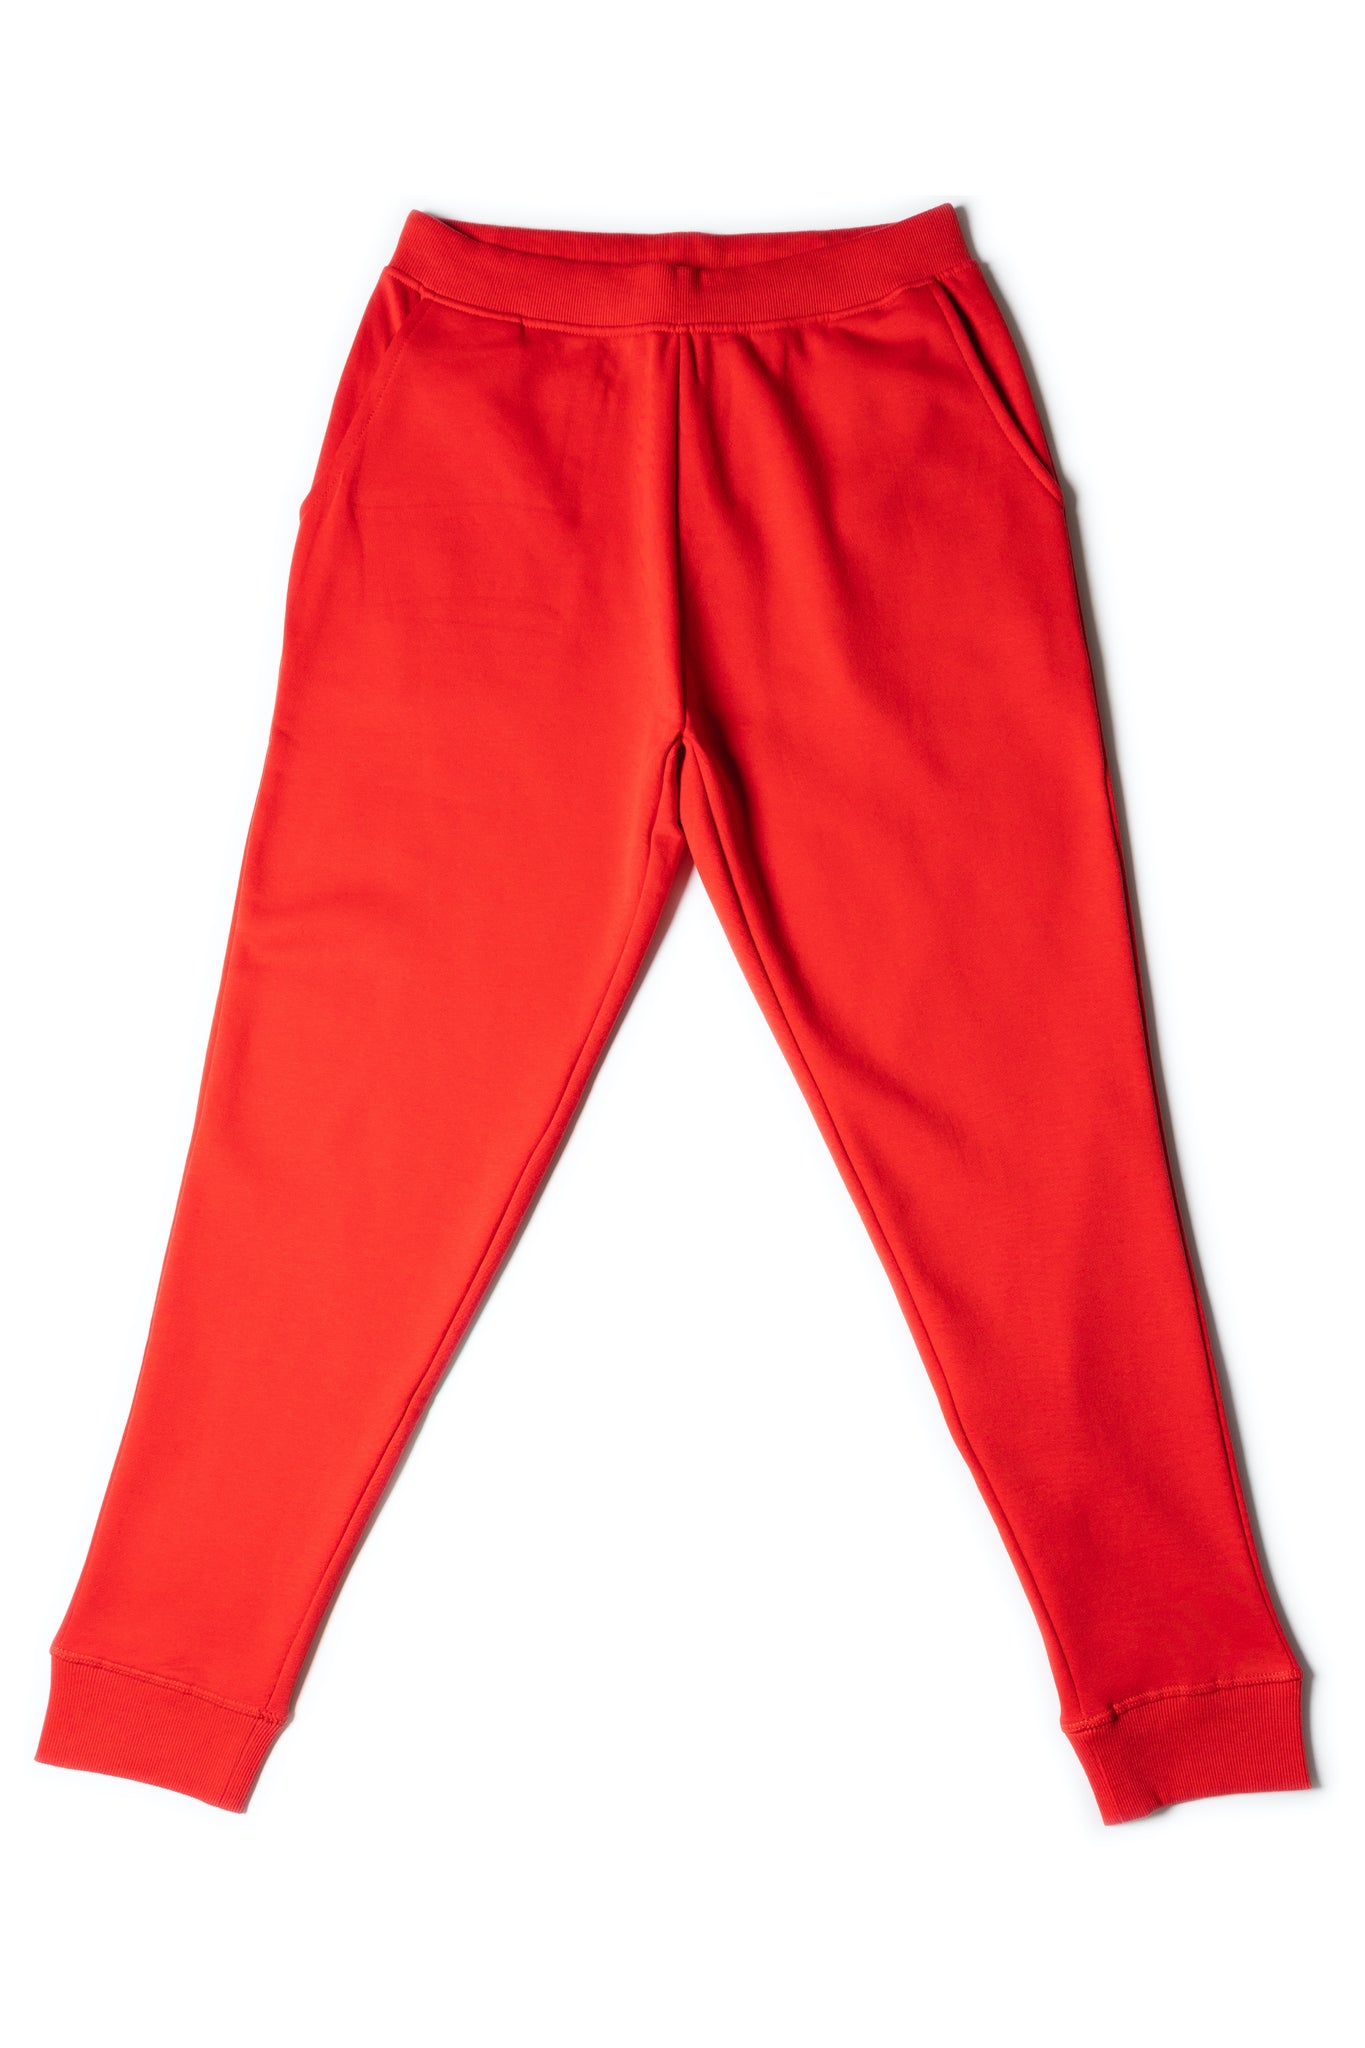 HERO-5020R Unisex Joggers - Red (Relaxed Fit) – Just Like Hero